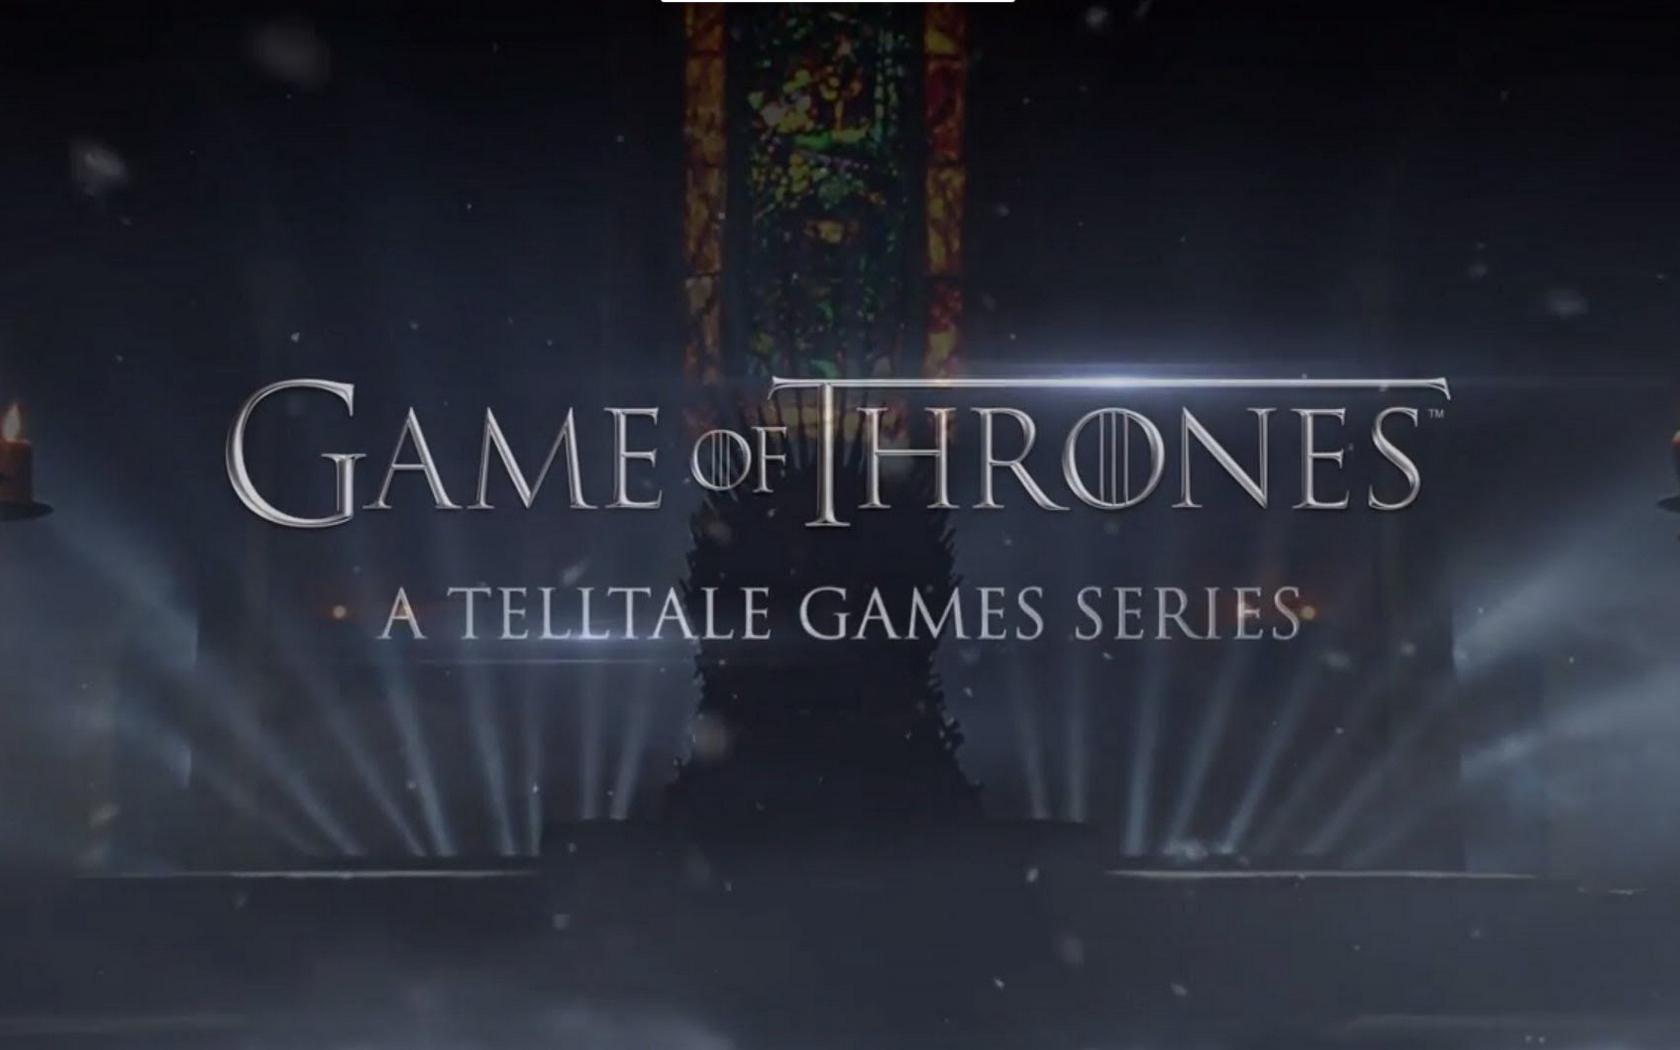 Download wallpaper 1680x1050 game of thrones a telltale